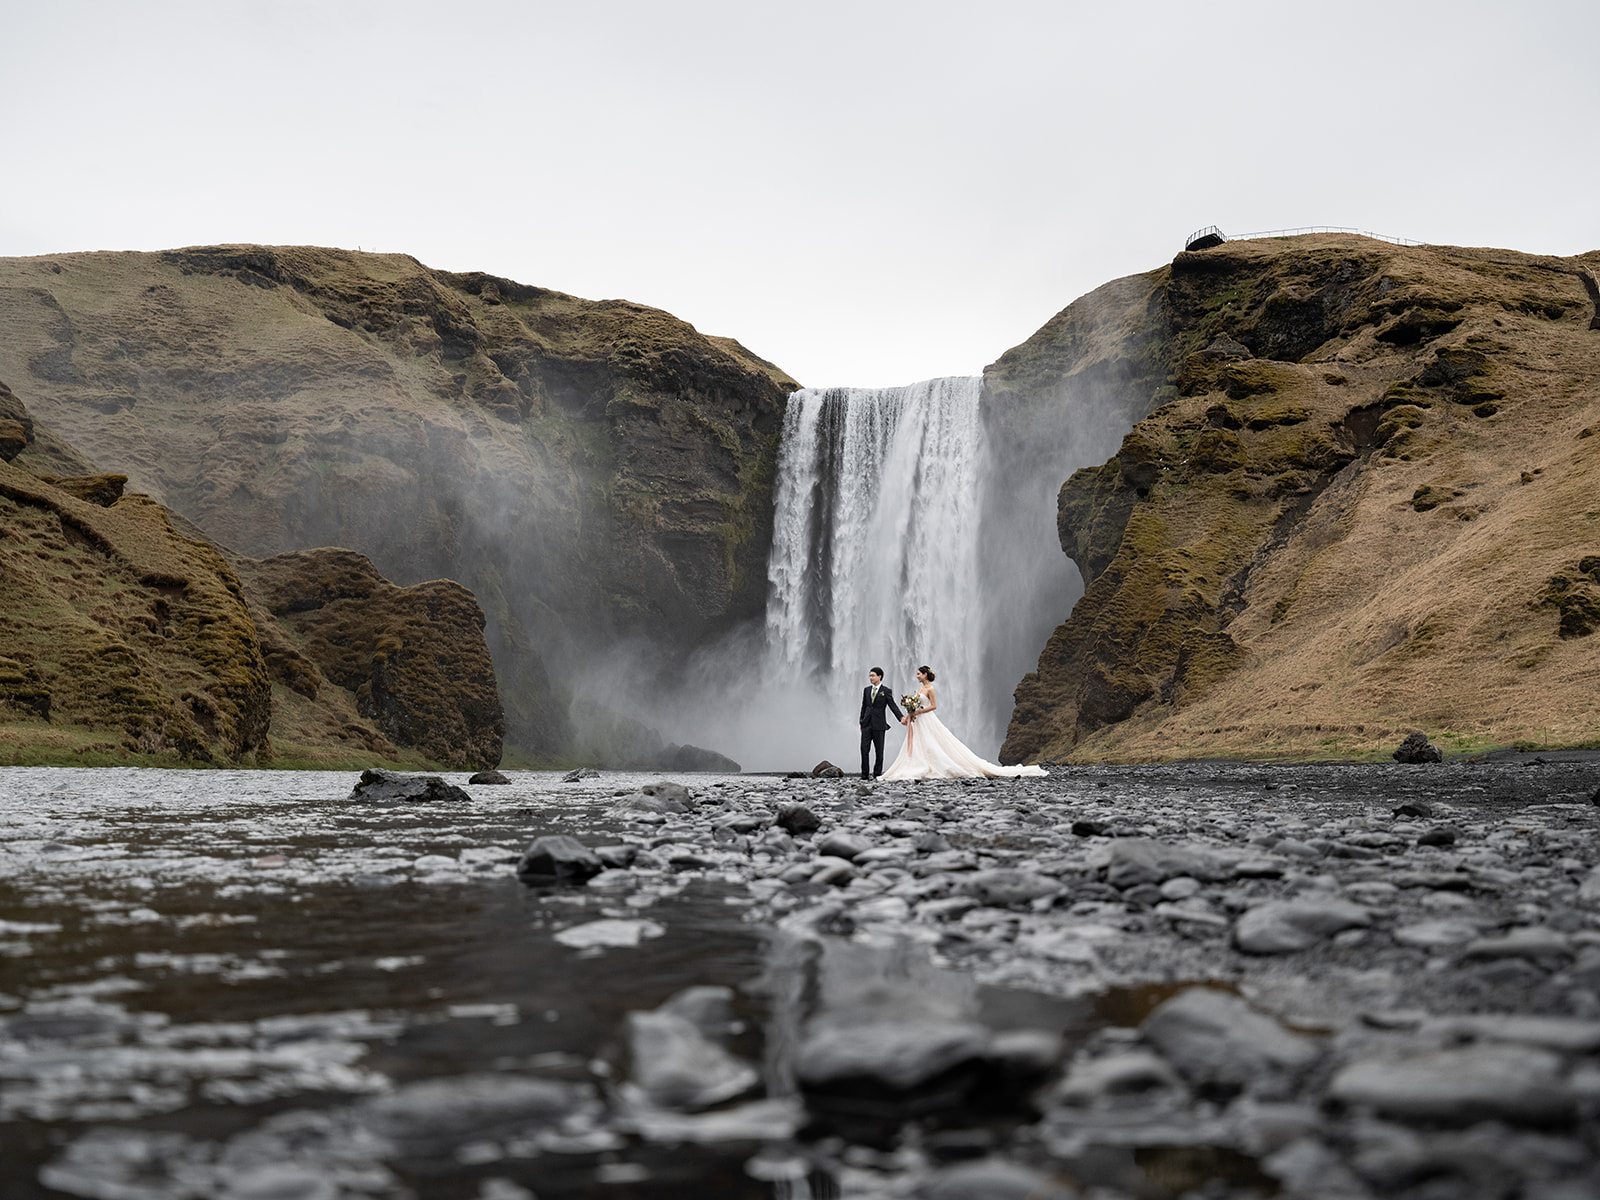 Couple Eloping at Skogafoss waterfall in Iceland.